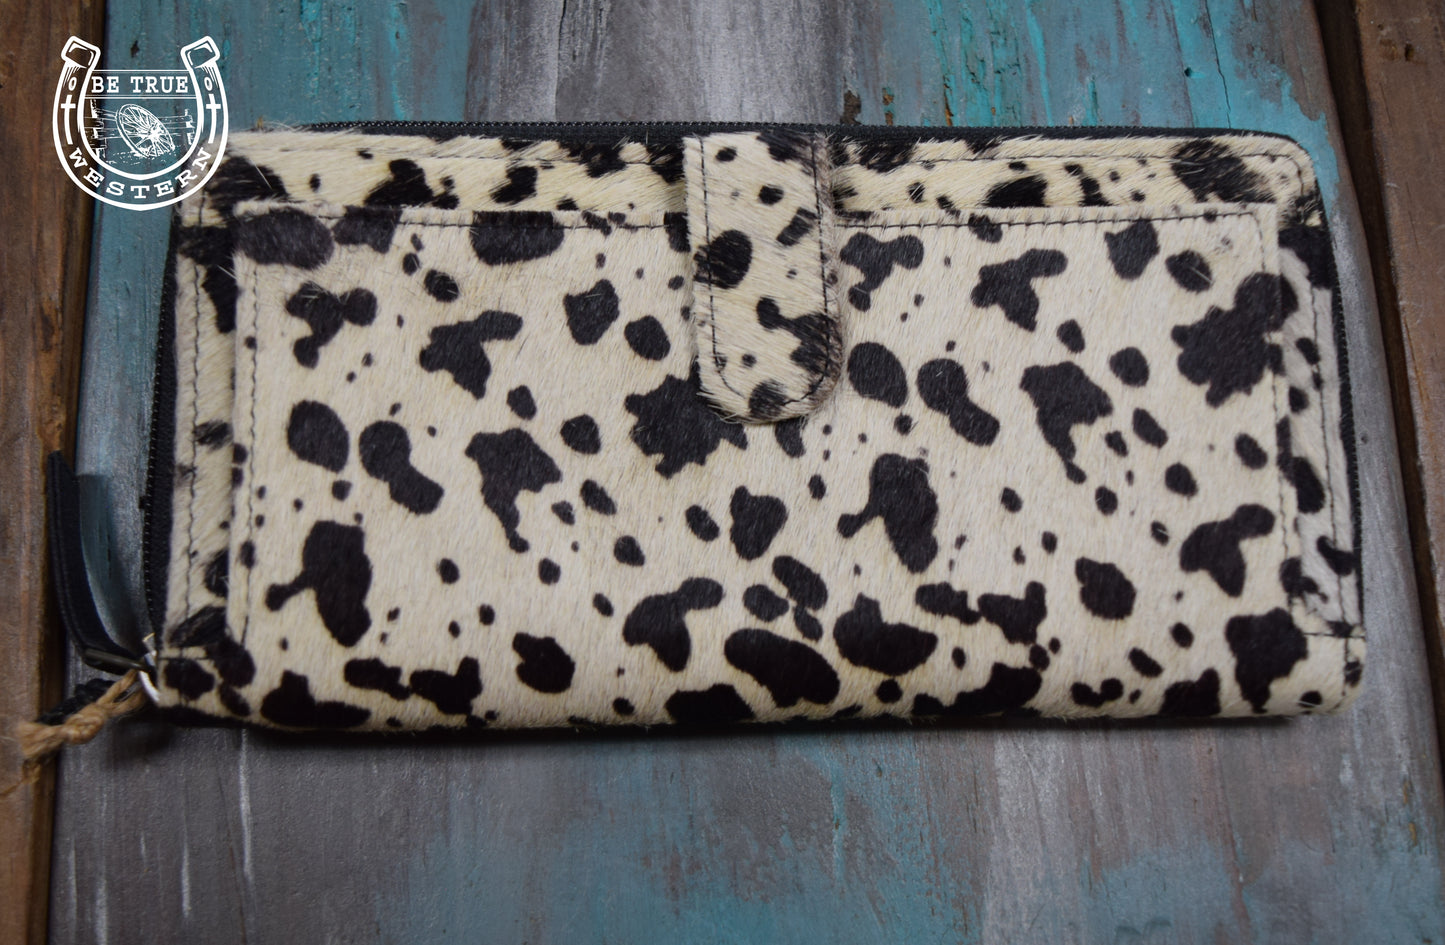 The Propel Black and White Speckled Cowhide Wallet